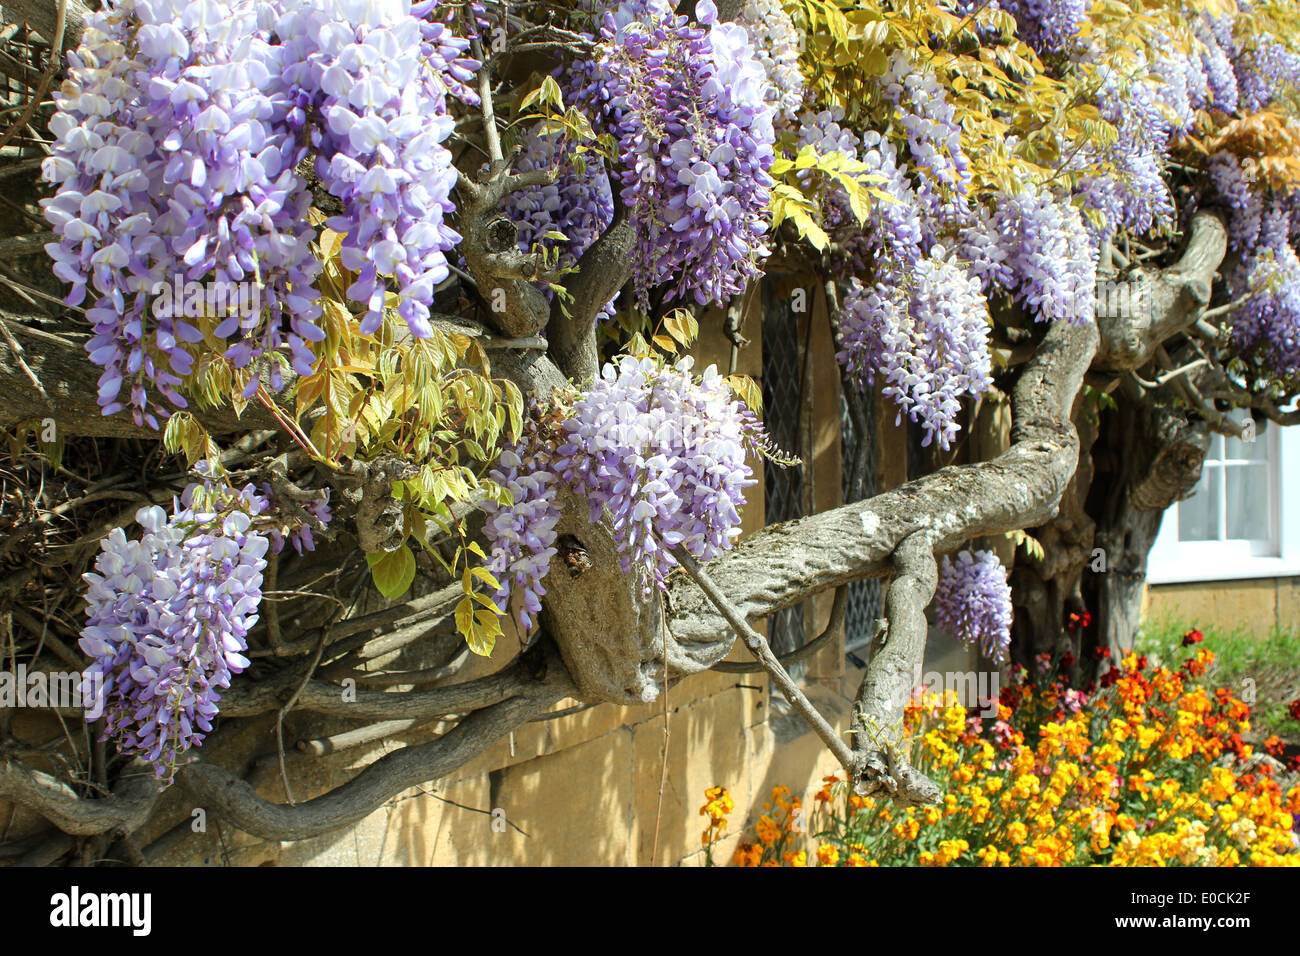 Wisteria sinensis in full bloom with wallflowers Stock Photo